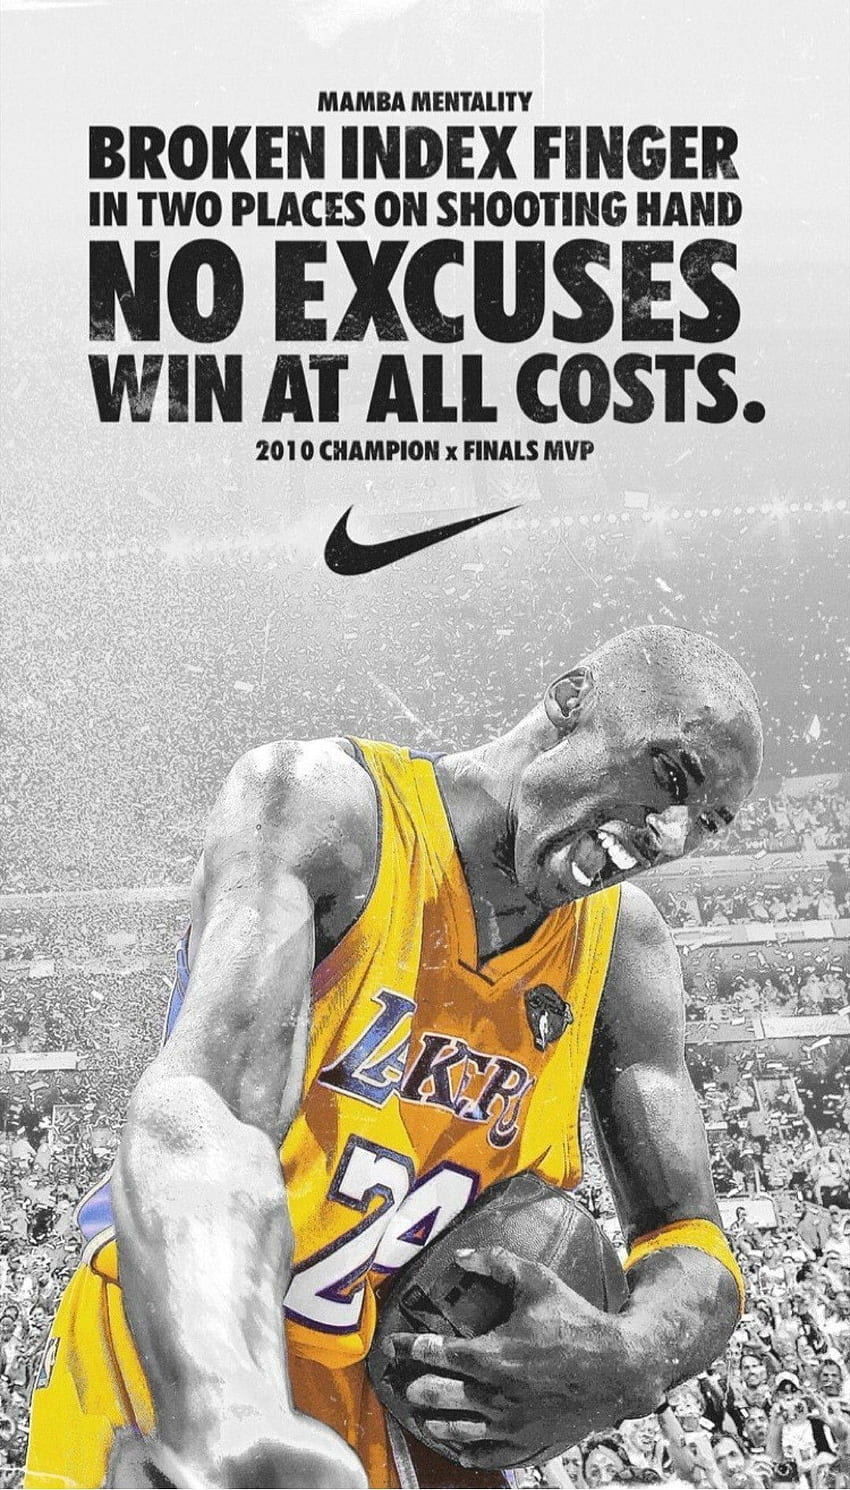 Kobe quotes HD wallpapers  Pxfuel